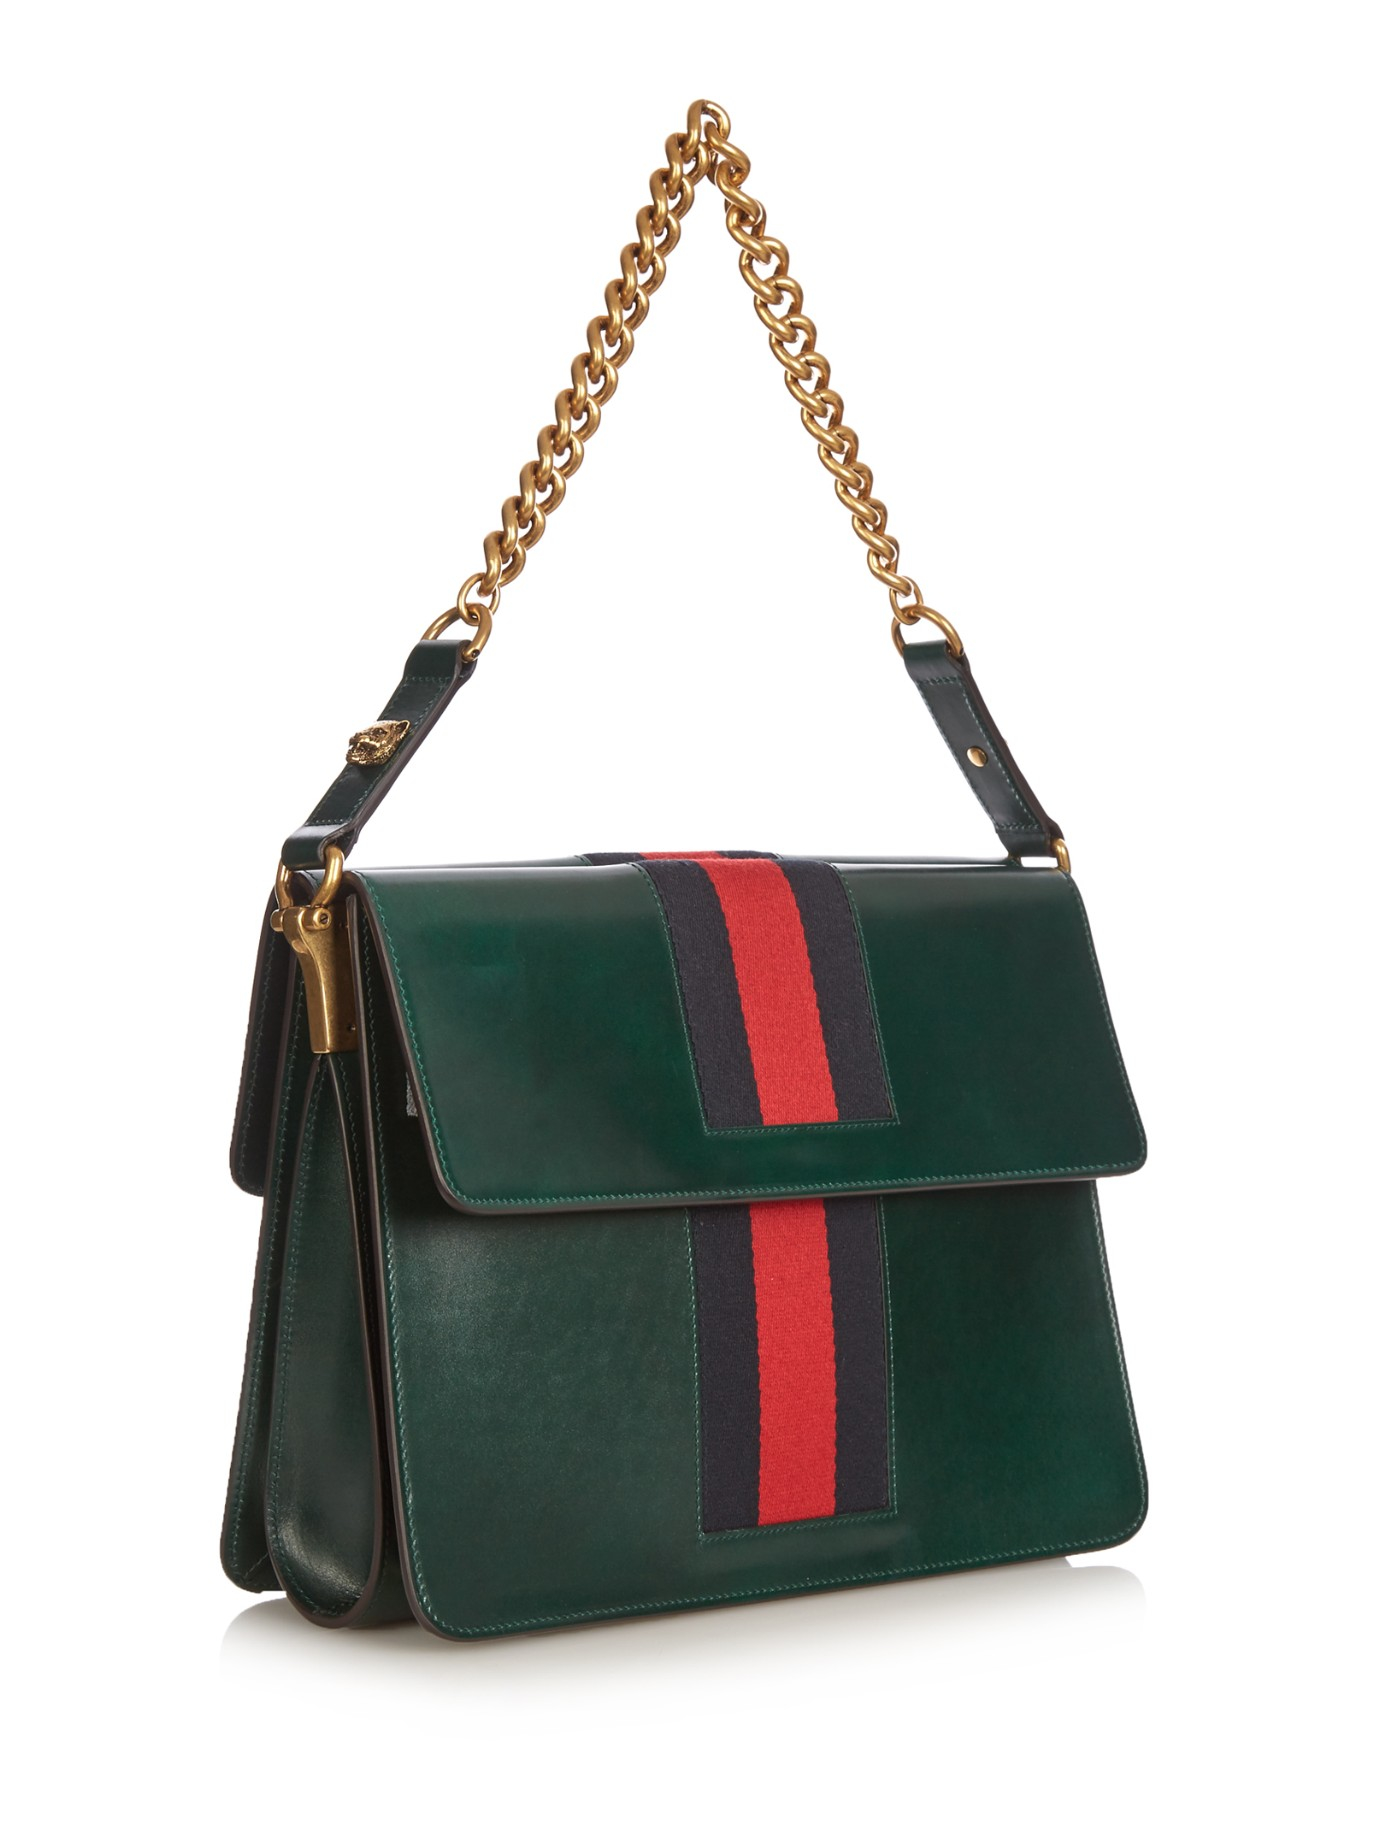 Lyst - Gucci GG Marmont Leather Shoulder Bag in Green